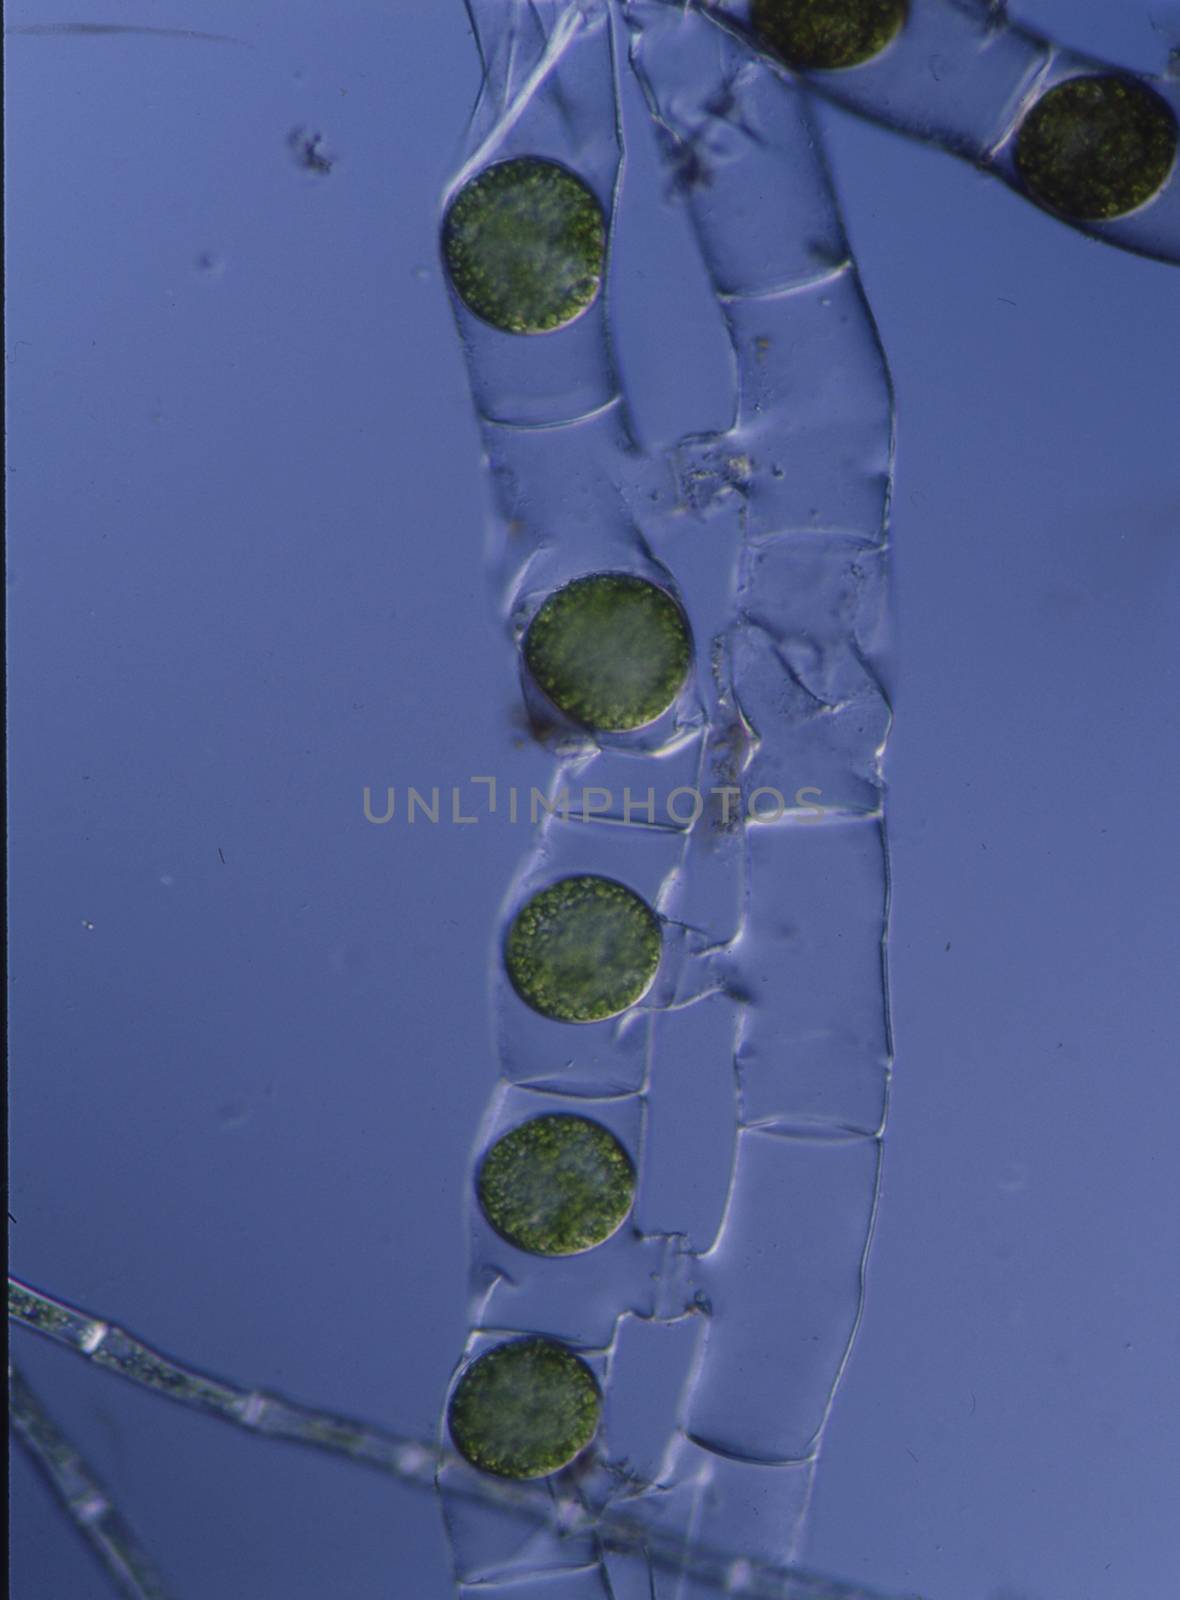 elongated green algae in the water under the microscope by Dr-Lange